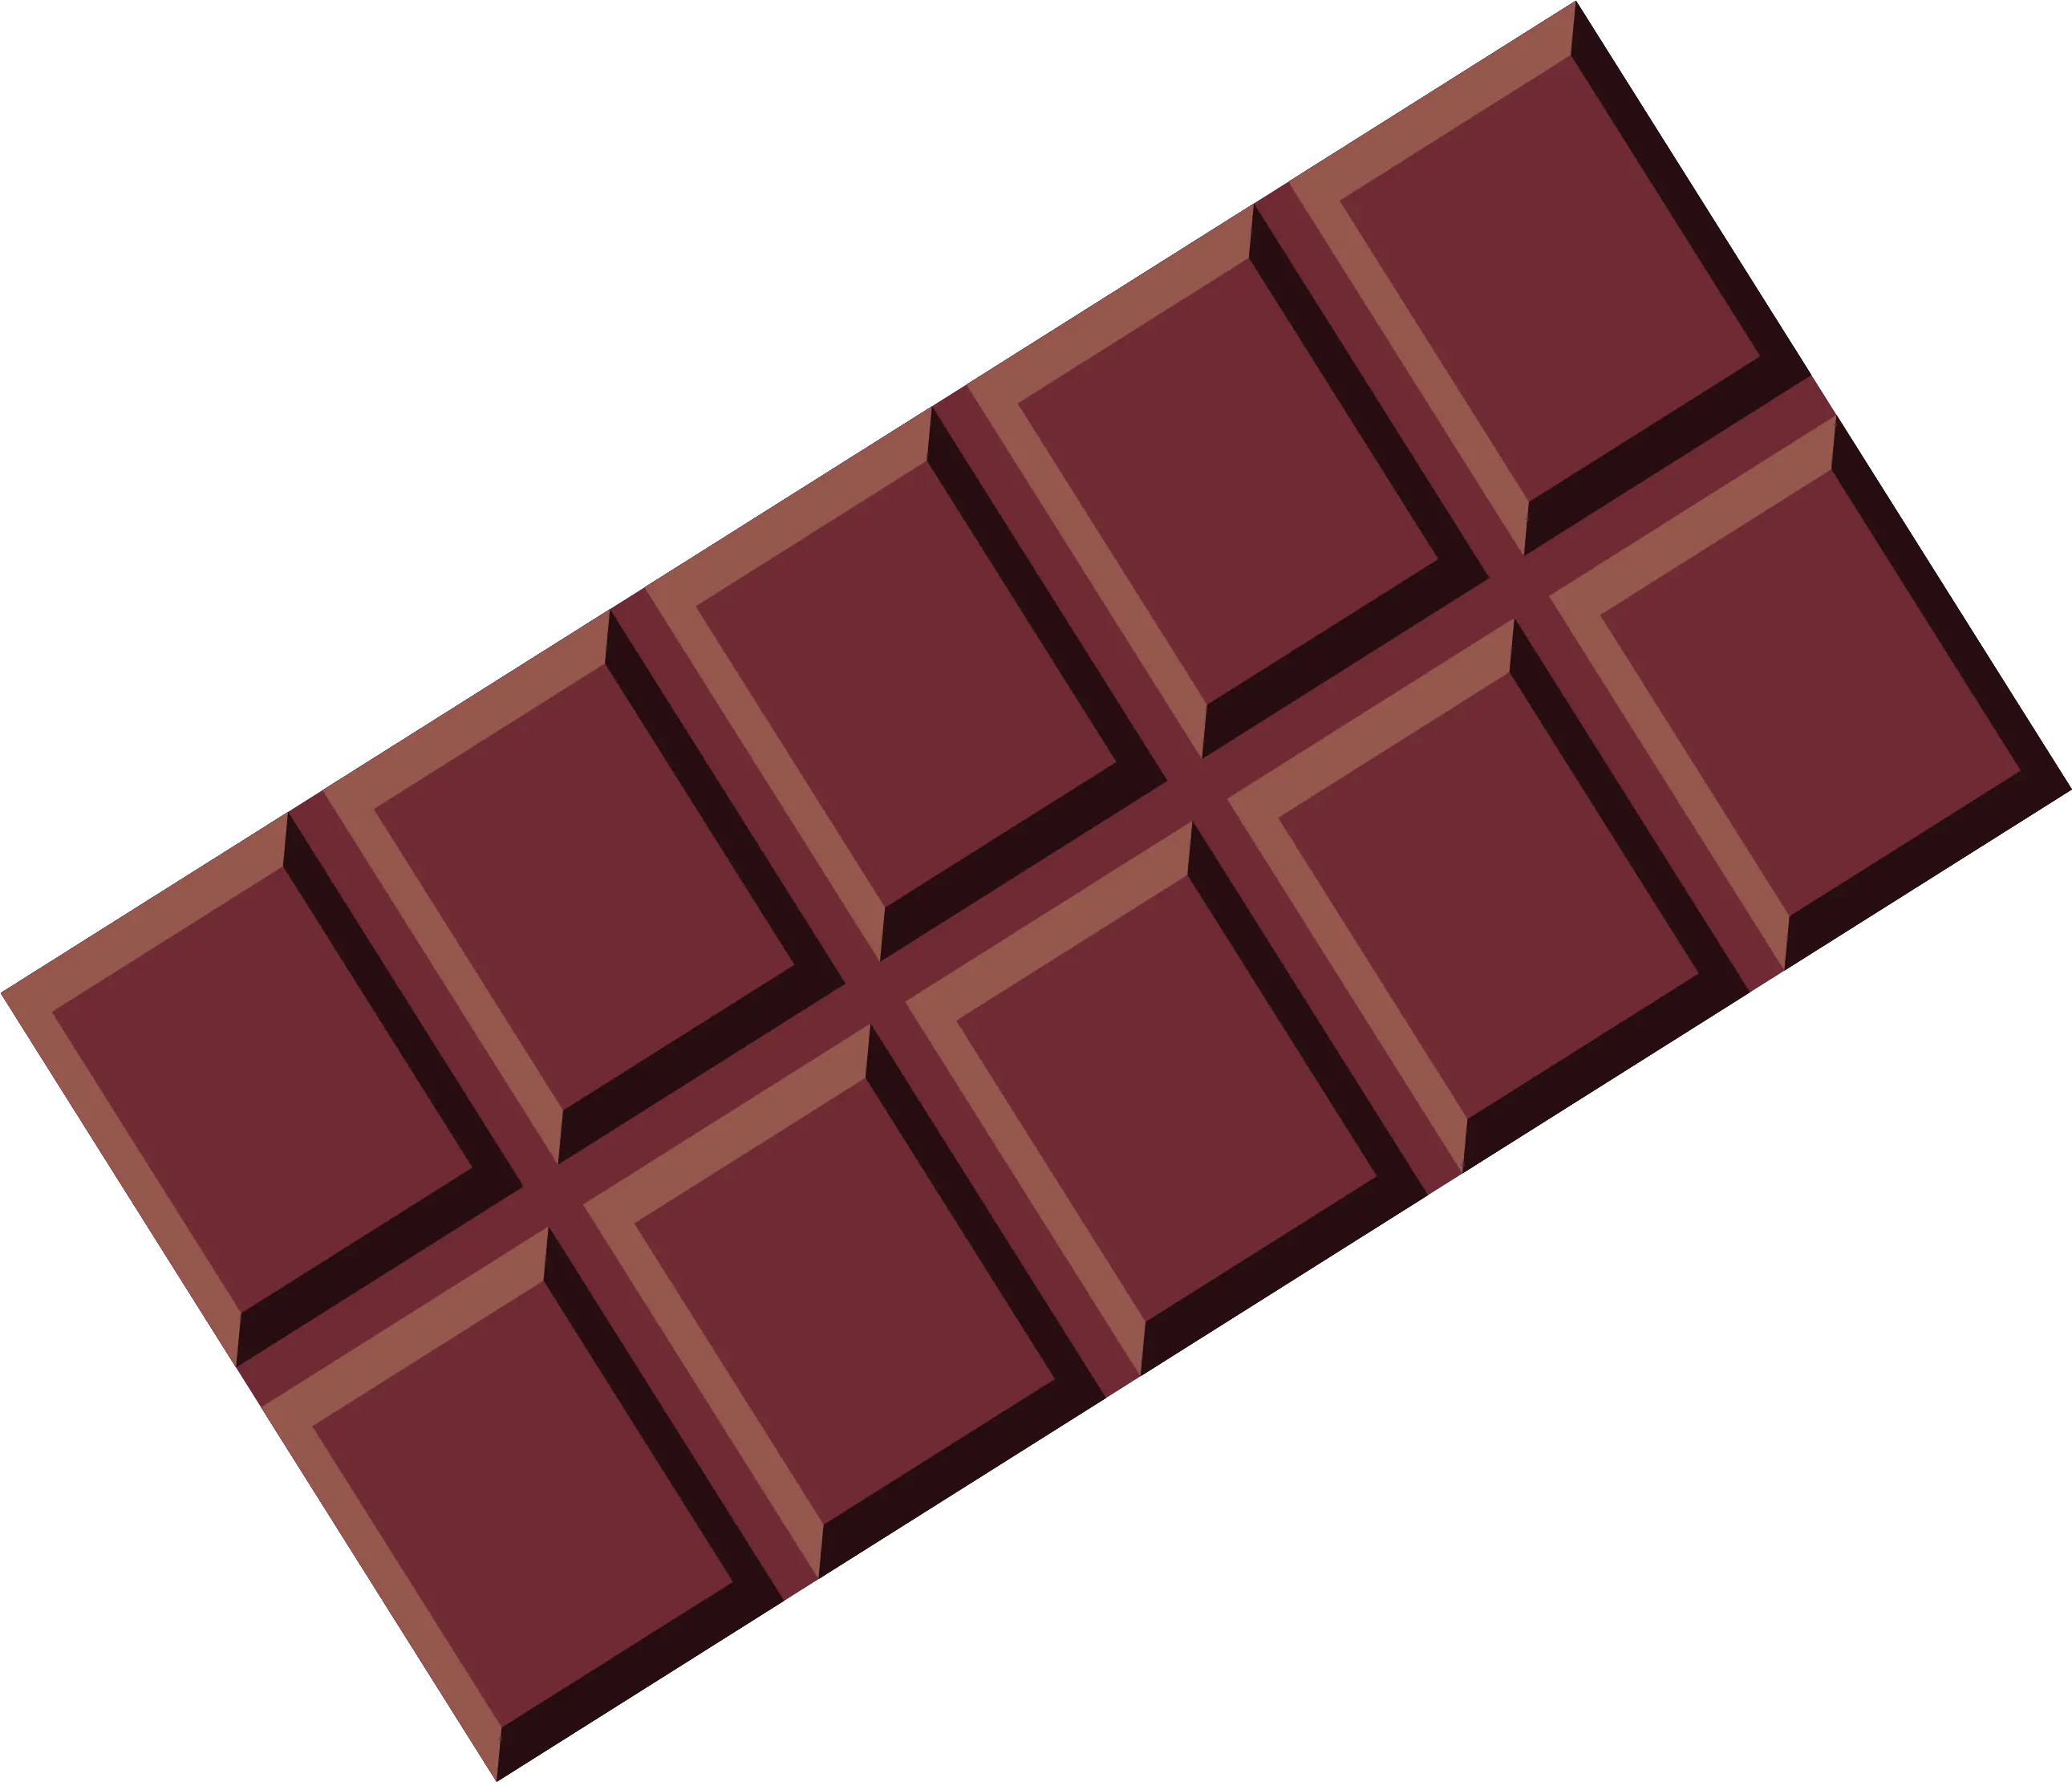 Chocolate Bar Snack Candy Vector Chocolate Png Download Chocolate Bar Png Bar Png